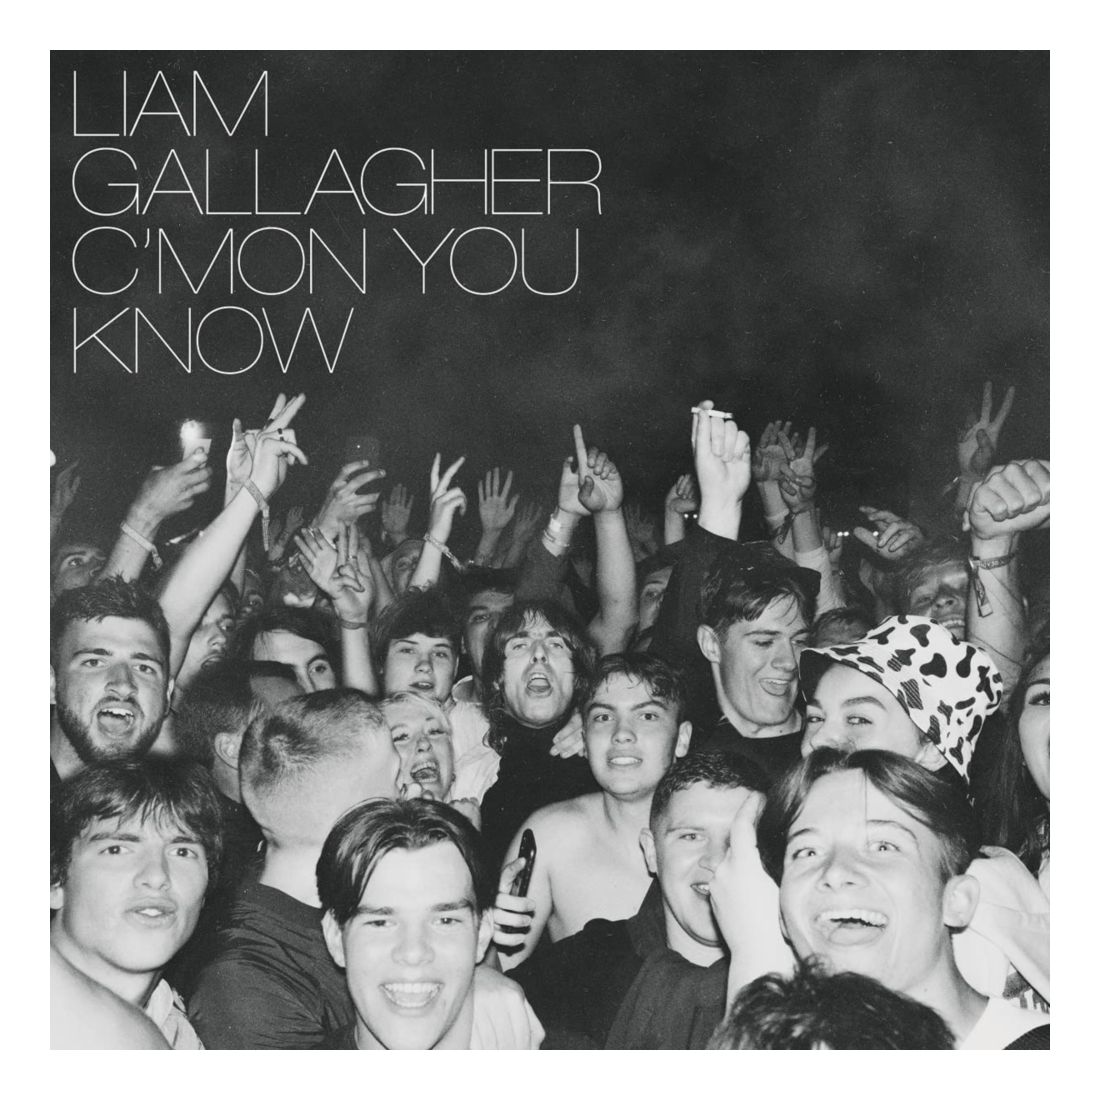 liam gallagher liam gallagher c’mon you know limited colour red CD диск C'Mon You Know | Liam Gallagher